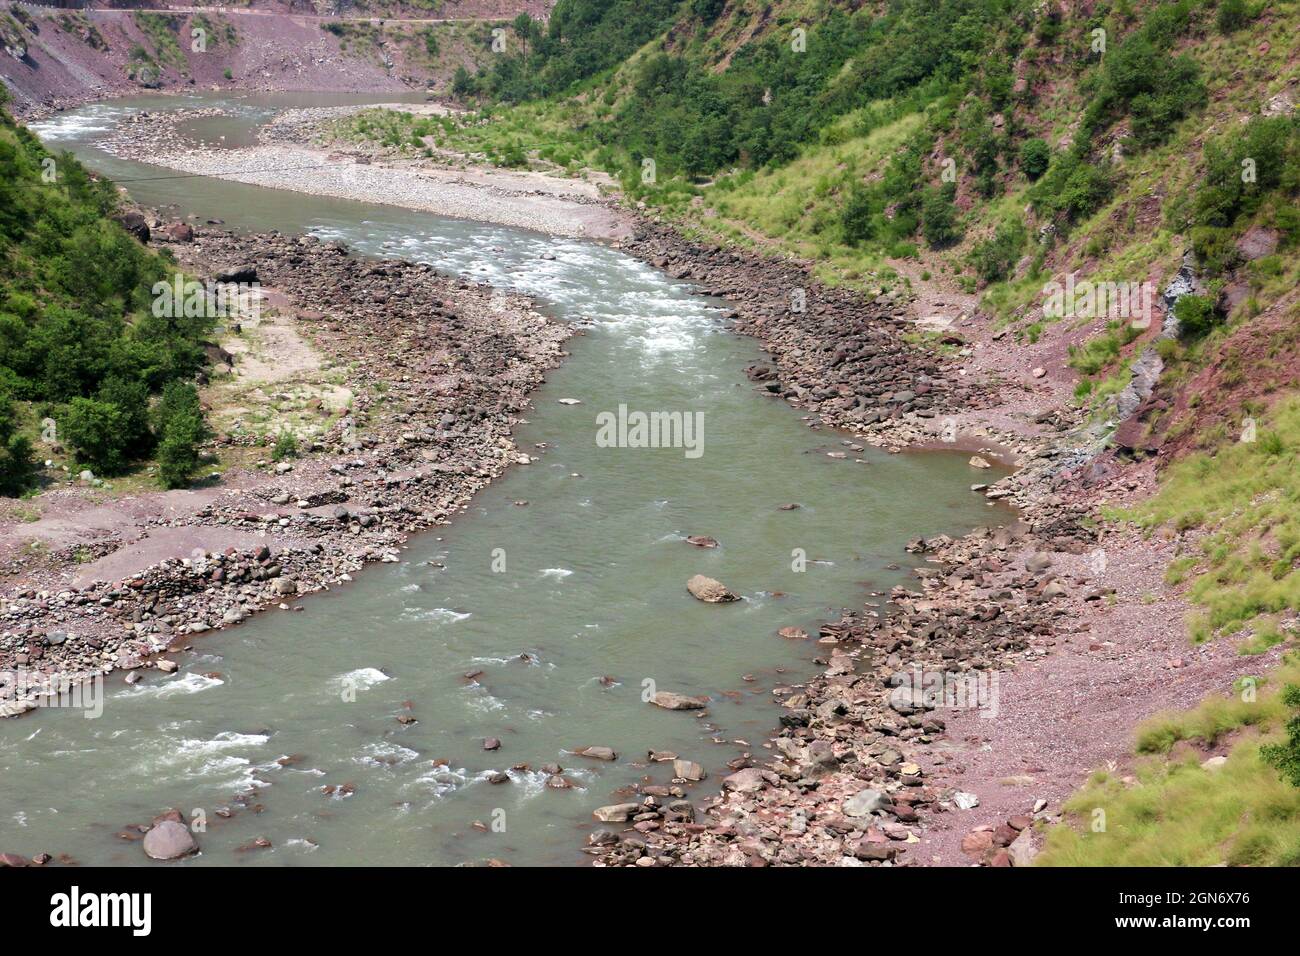 Small River Flowing Over Rocks light green Water Stock Photo